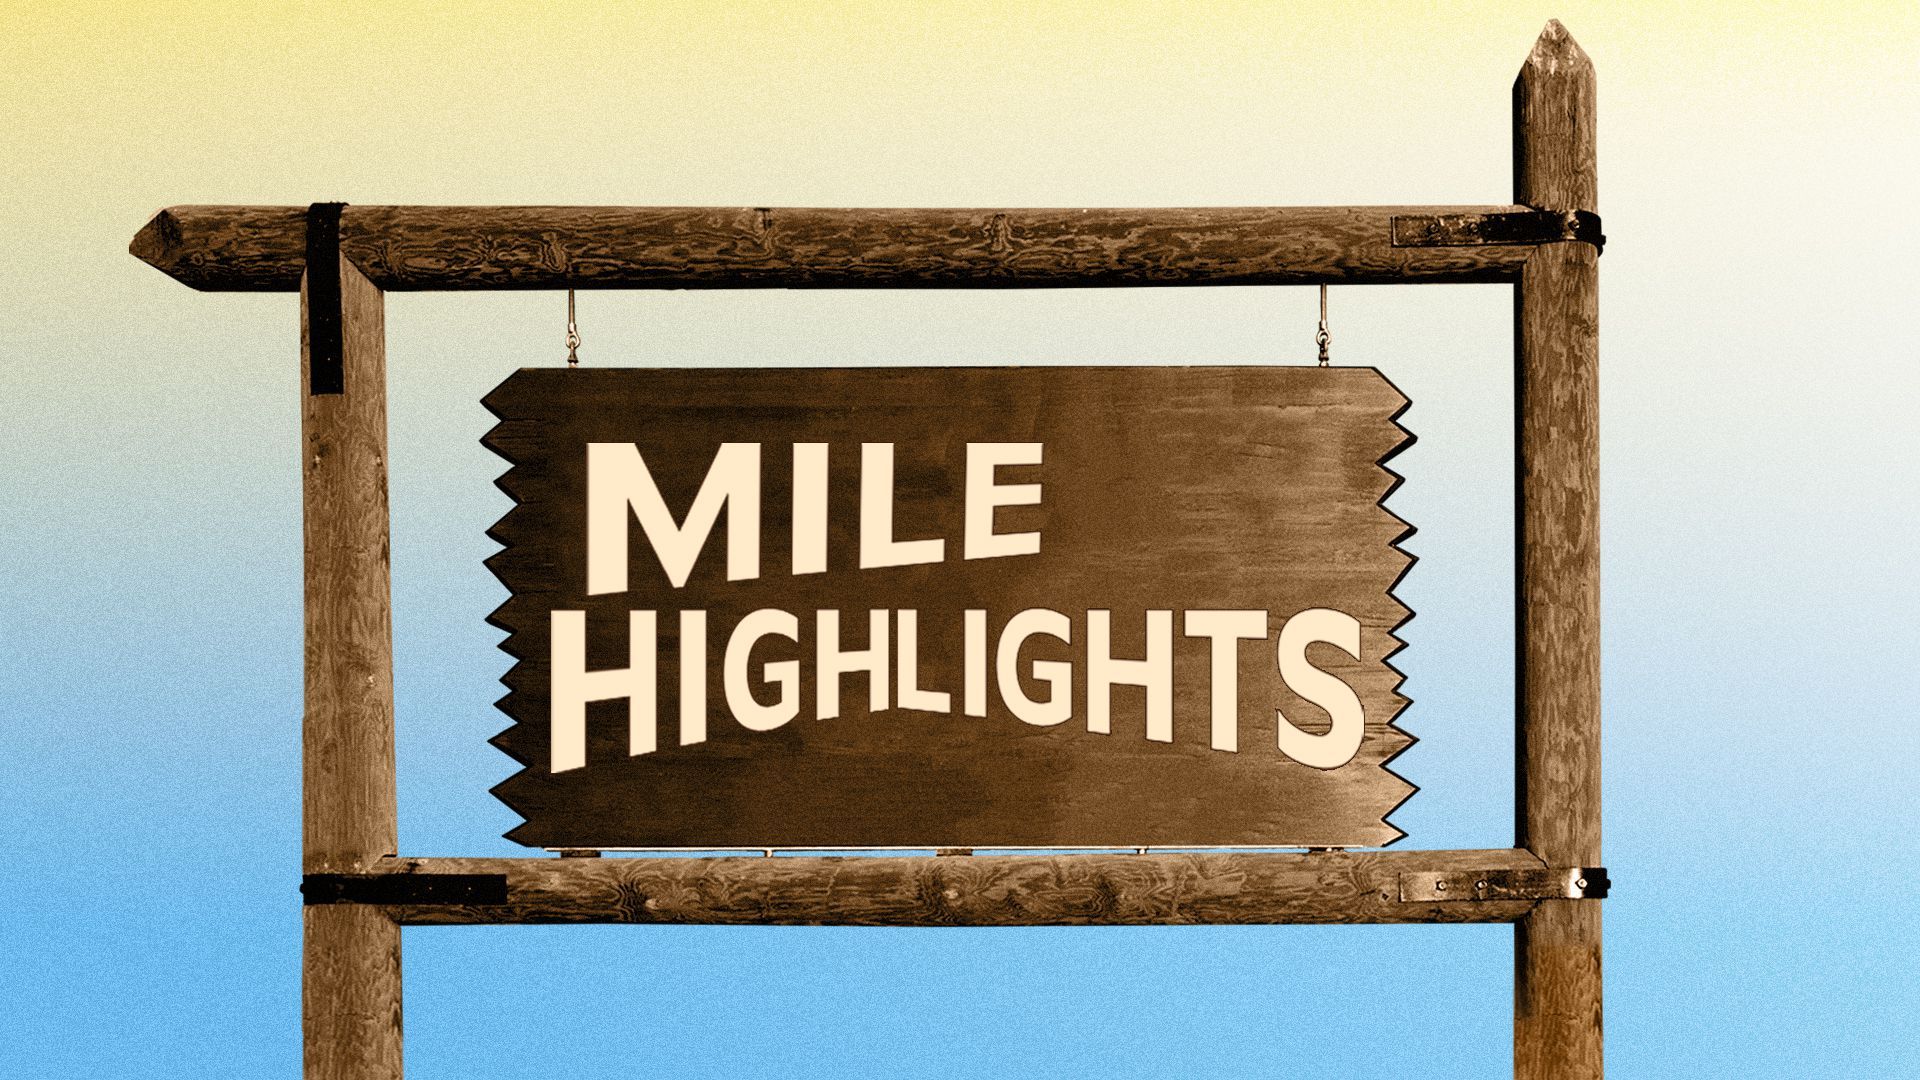 Illustration of "Mile Highlights" on the "Welcome to Colorado" wooden sign.